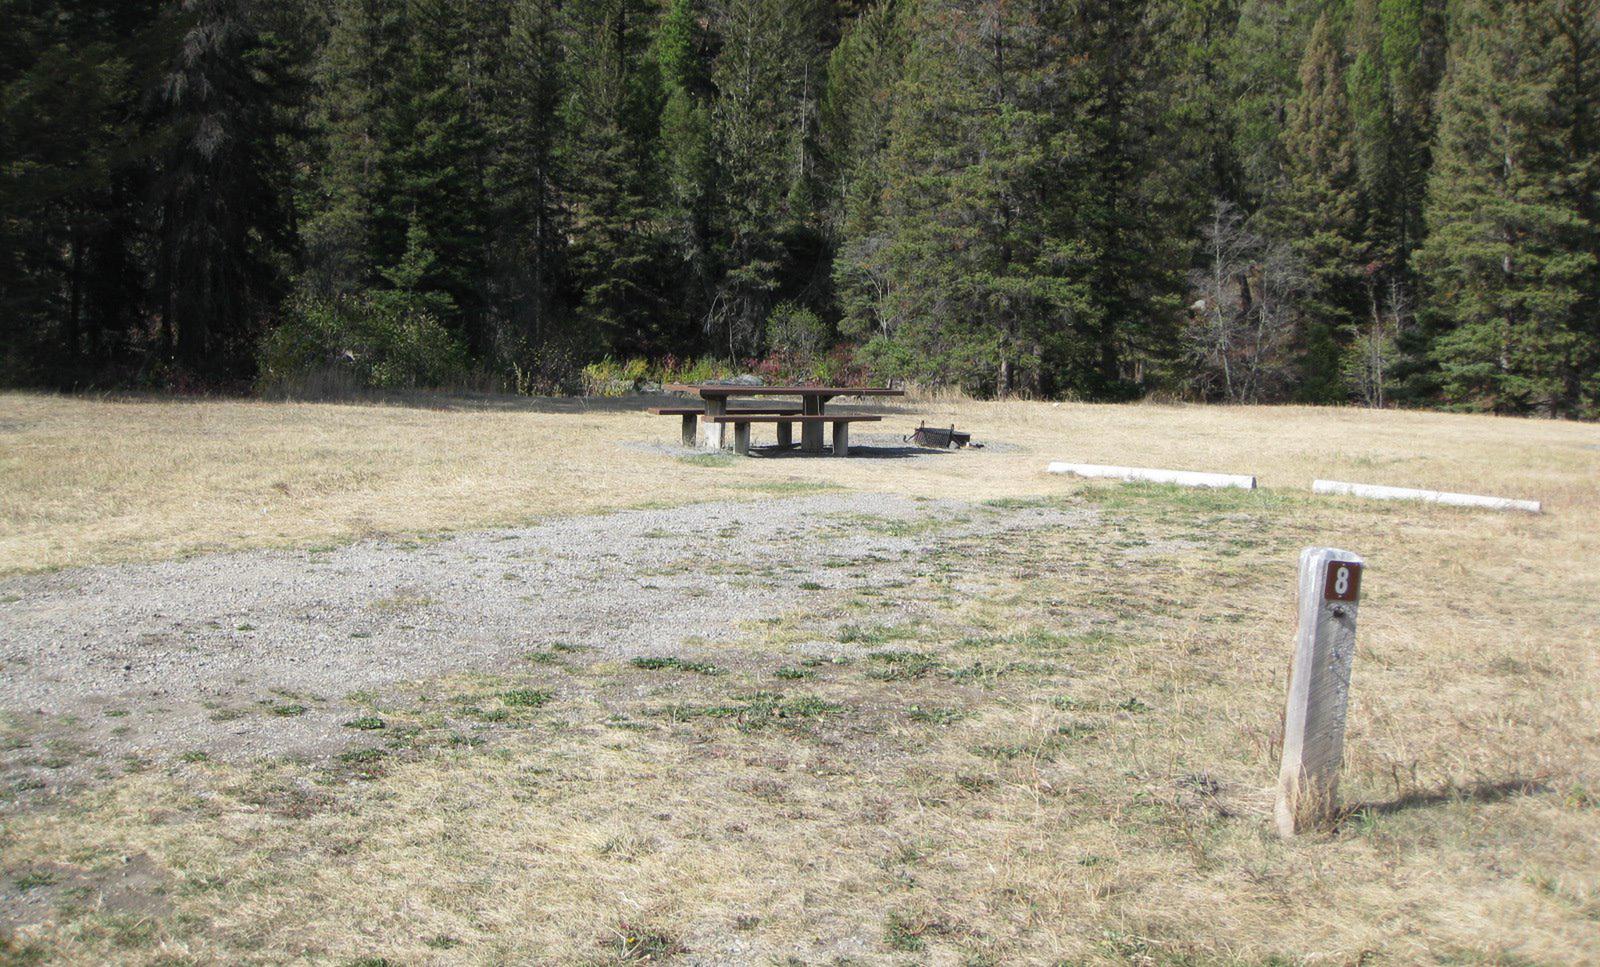 Site 8 campsite - pine trees along river, picnic table & fire ringSite 8